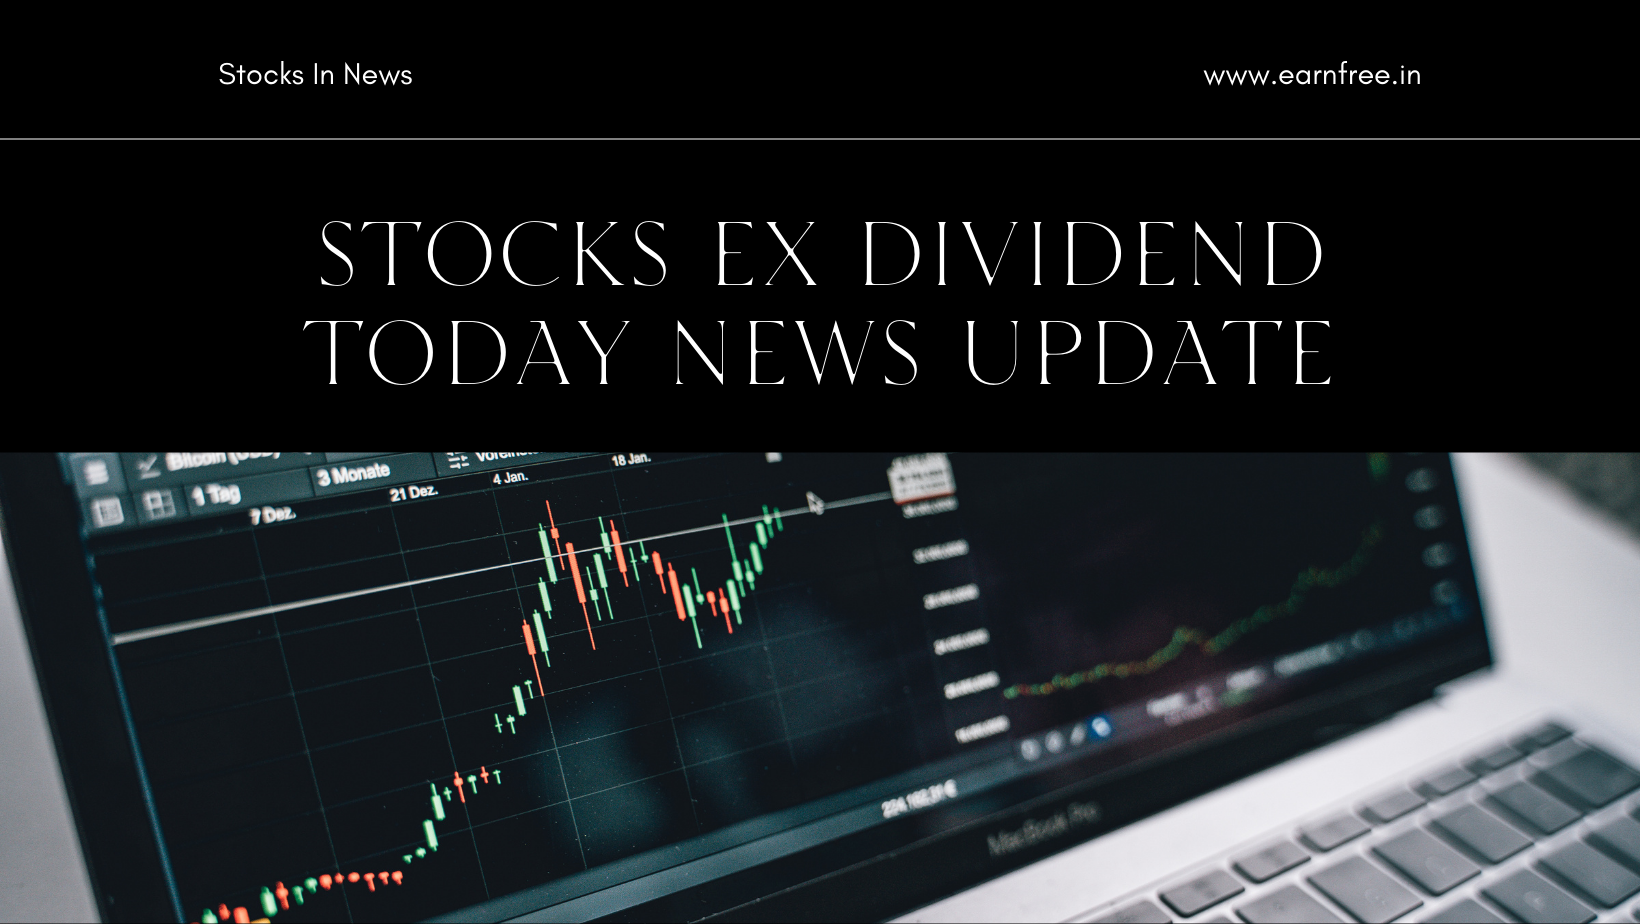 STOCKS EX DIVIDEND TODAY